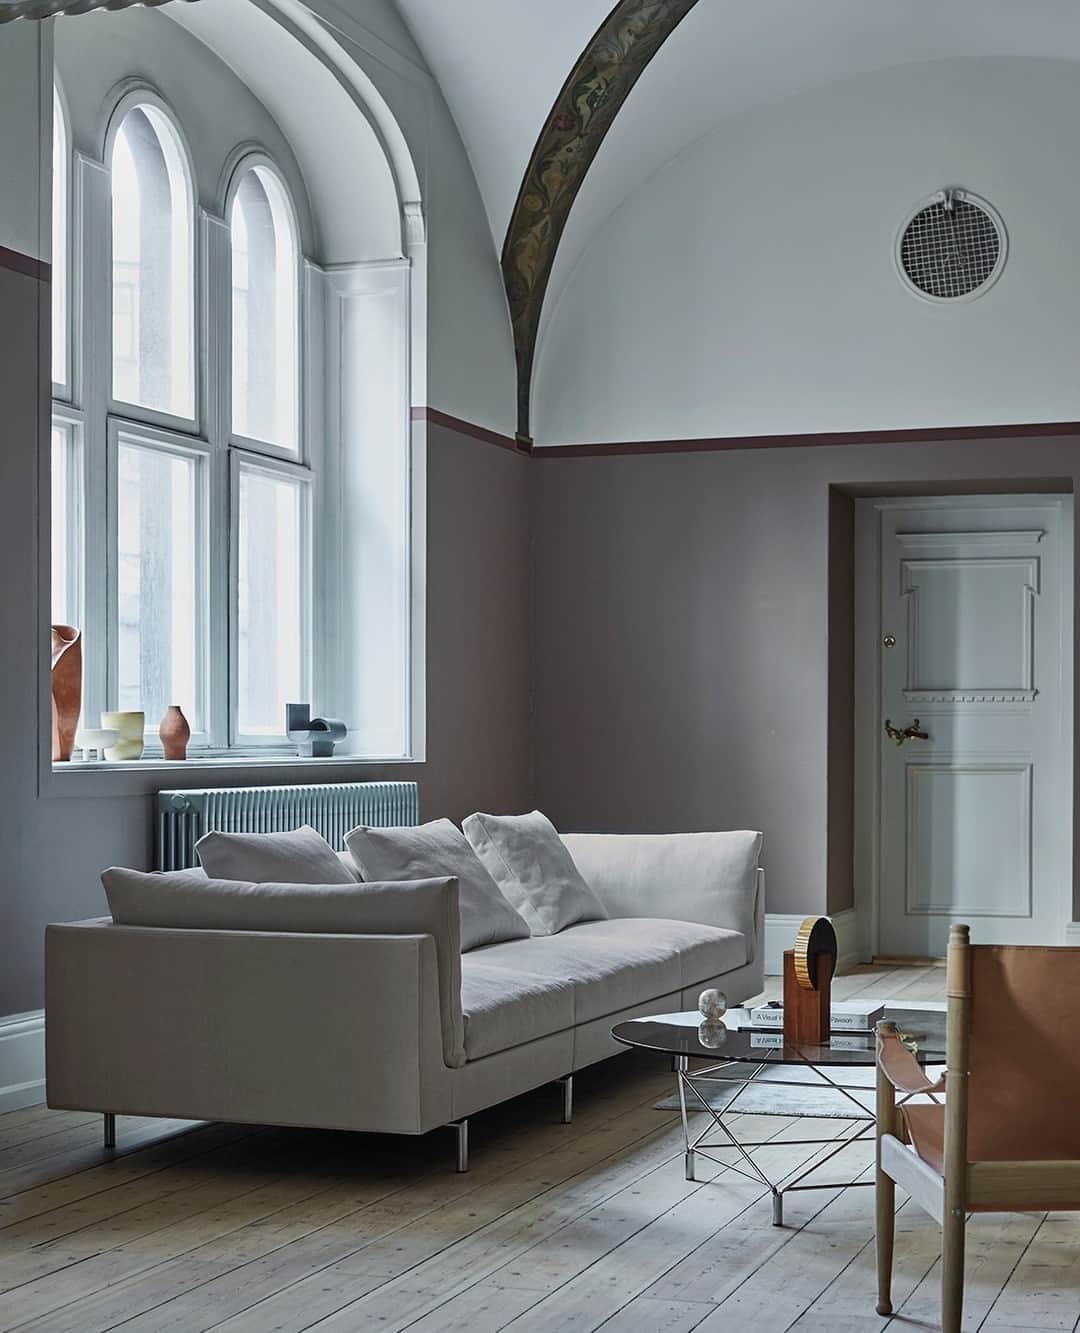 eilersenのインスタグラム：「Unveiling the epitome of comfort and style, the Float High sofa was designed by Jens Juul Eilersen and is here seen in combination with our Spider table designed by Andreas Hansen.⁠ ⁠ Sofa: Float High upholstered in Herring  20⁠ ⁠ ⁠ ⁠ ⁠ ⁠ ⁠ #eilersen #eilersenfurniture #myeilersen #enjoyaneilersen #FloatHigh #jensjuuleilersen #funen #pierresindre #homedecor #sofa #danishdesign #inredning #finahem #interiorlovers #interiordesign #modernliving #minimalism #nordiskehjem #nordicinspiration #nordicliving #craftsmanship #boligindretning #designinterior #livingroominspo #boliginspiration  #hemindredning #schönerwohnen #nordicminimalism #designinspiration #throughgenerations」